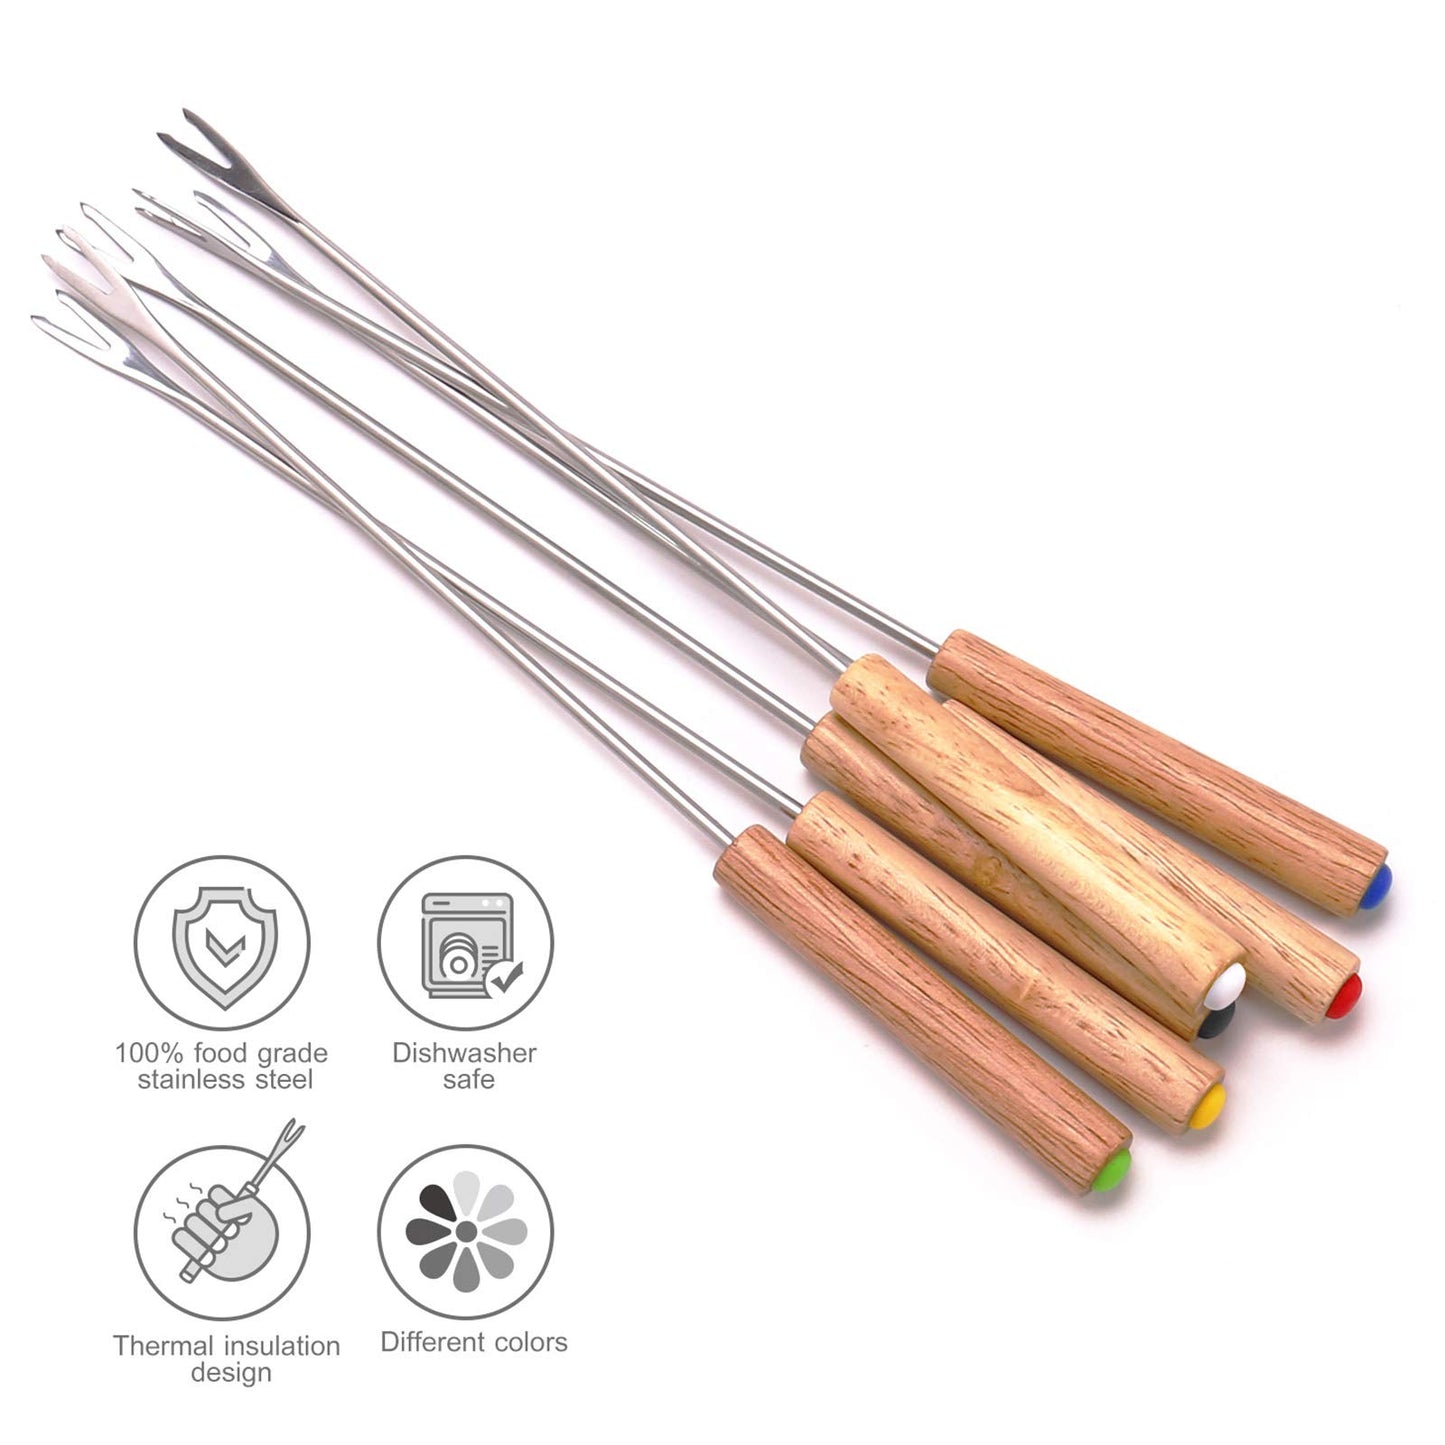 Set of 6 Stainless Steel Fondue Forks, 9.5 Inches Cheese Fondue Sticks Smore Sticks with Wooden Handle Heat Resistant for Chocolate Fountain Cheese Fondue Roast Marshmallows Fruits